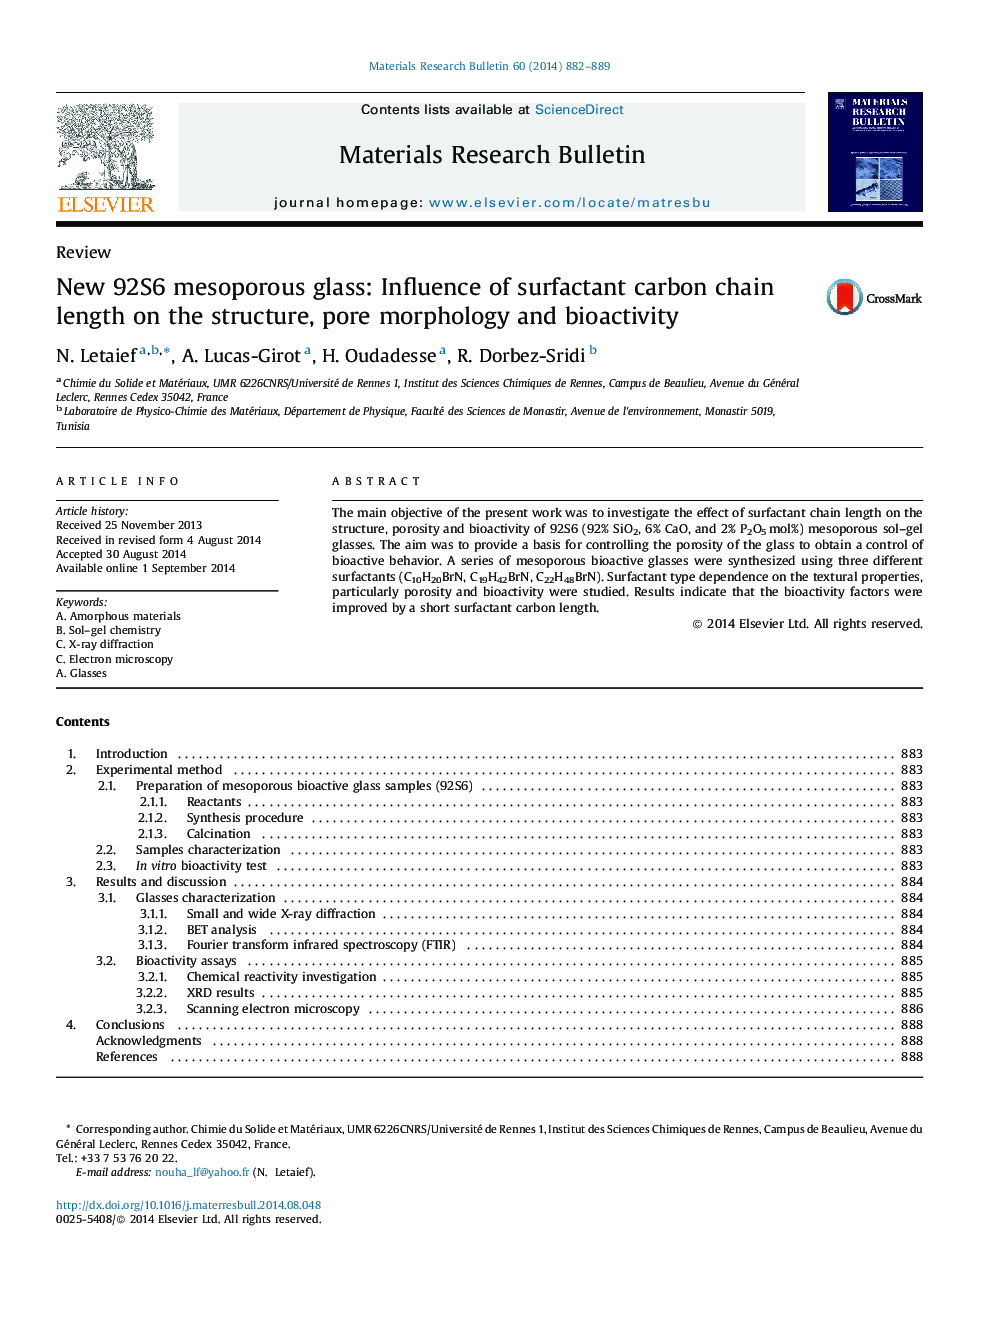 New 92S6 mesoporous glass: Influence of surfactant carbon chain length on the structure, pore morphology and bioactivity